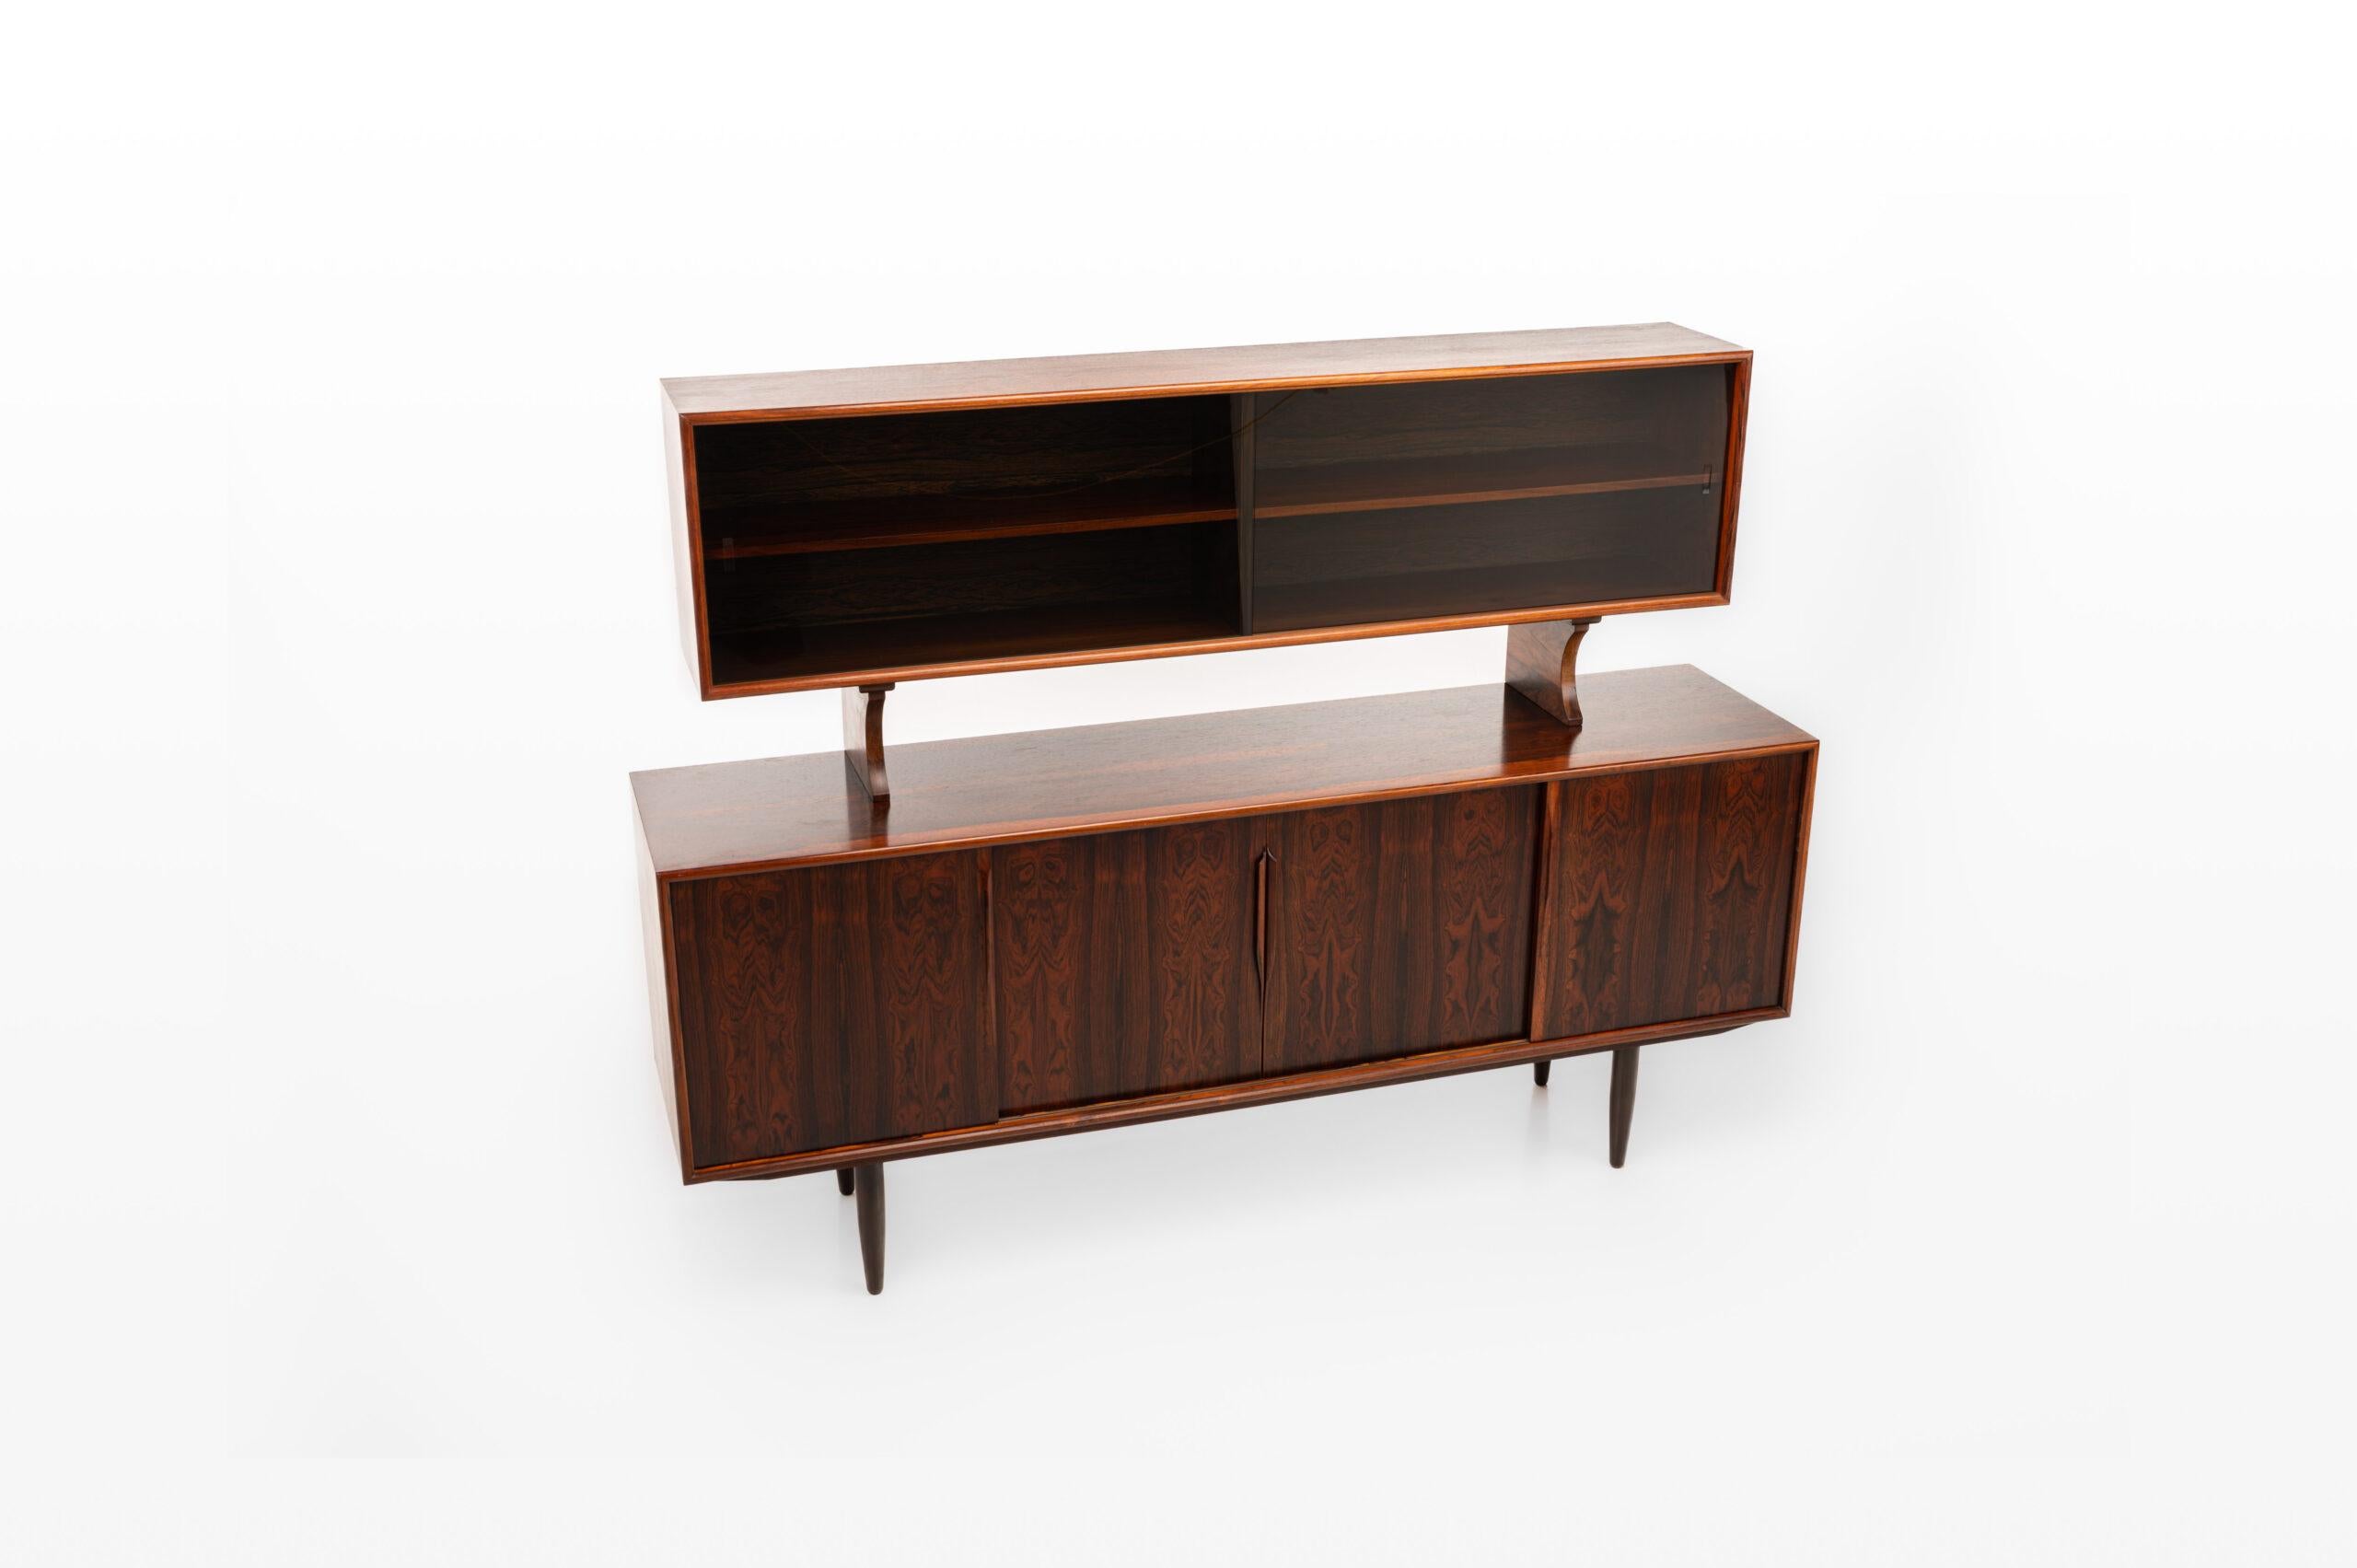 Vintage buffet sideboard by Axel Christensen for ACO Møbler, Denmark 1960s. Beautifully designed sideboard in rosewood with elegant handles, three drawers and plenty of storage space with adjustable shelves. The sideboard is marked by the